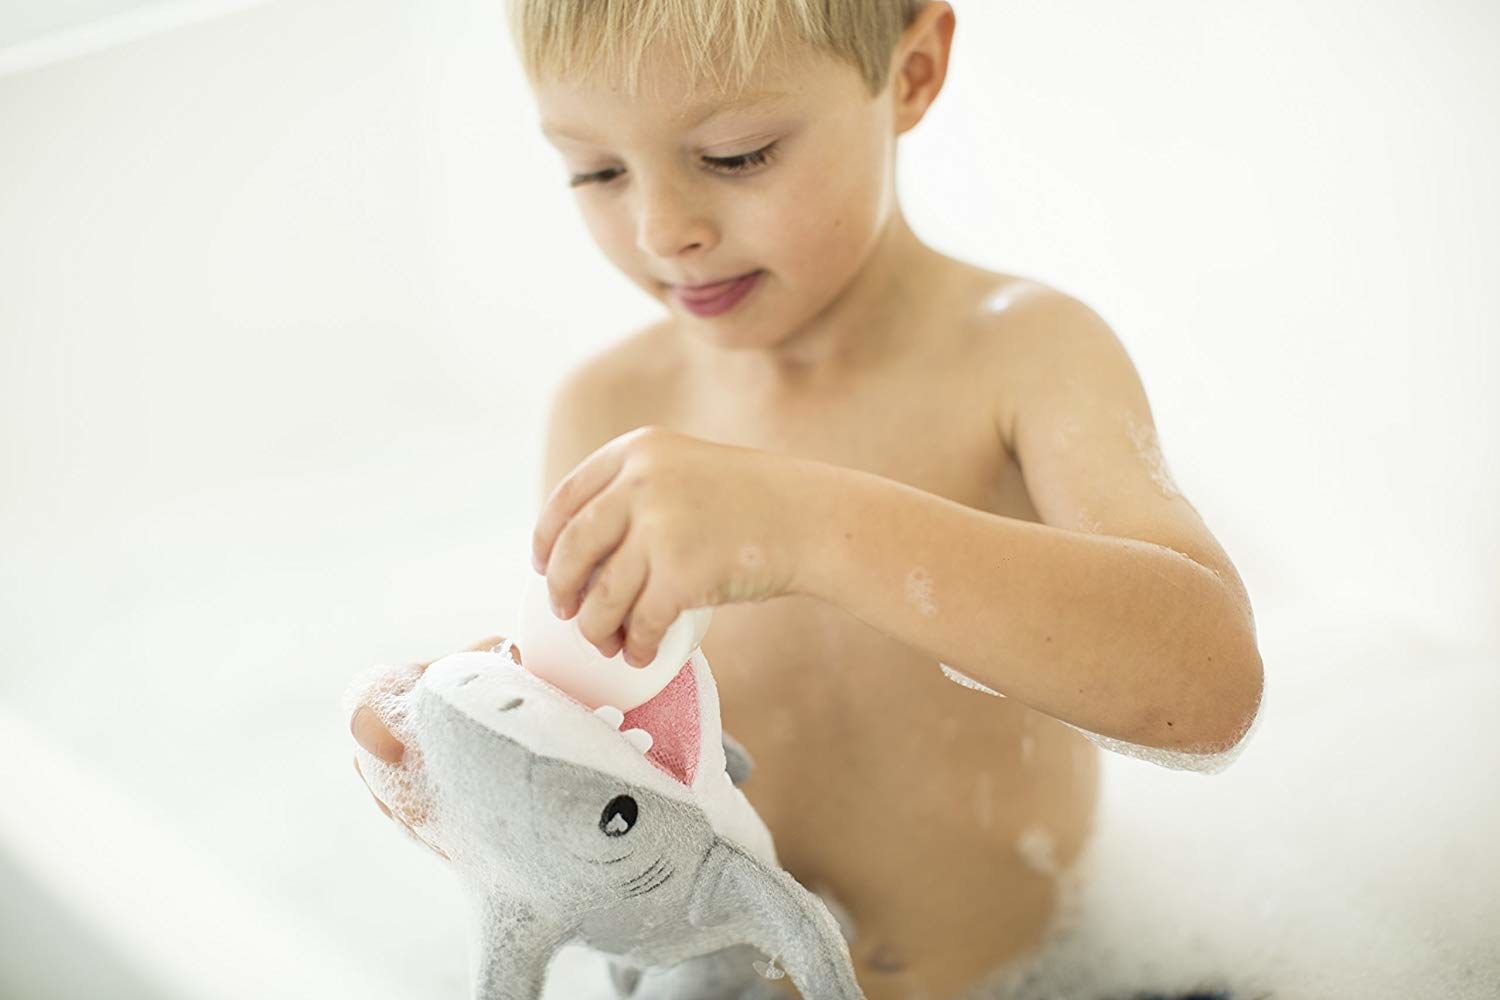 A little kid playing with the shark sponge in the bath